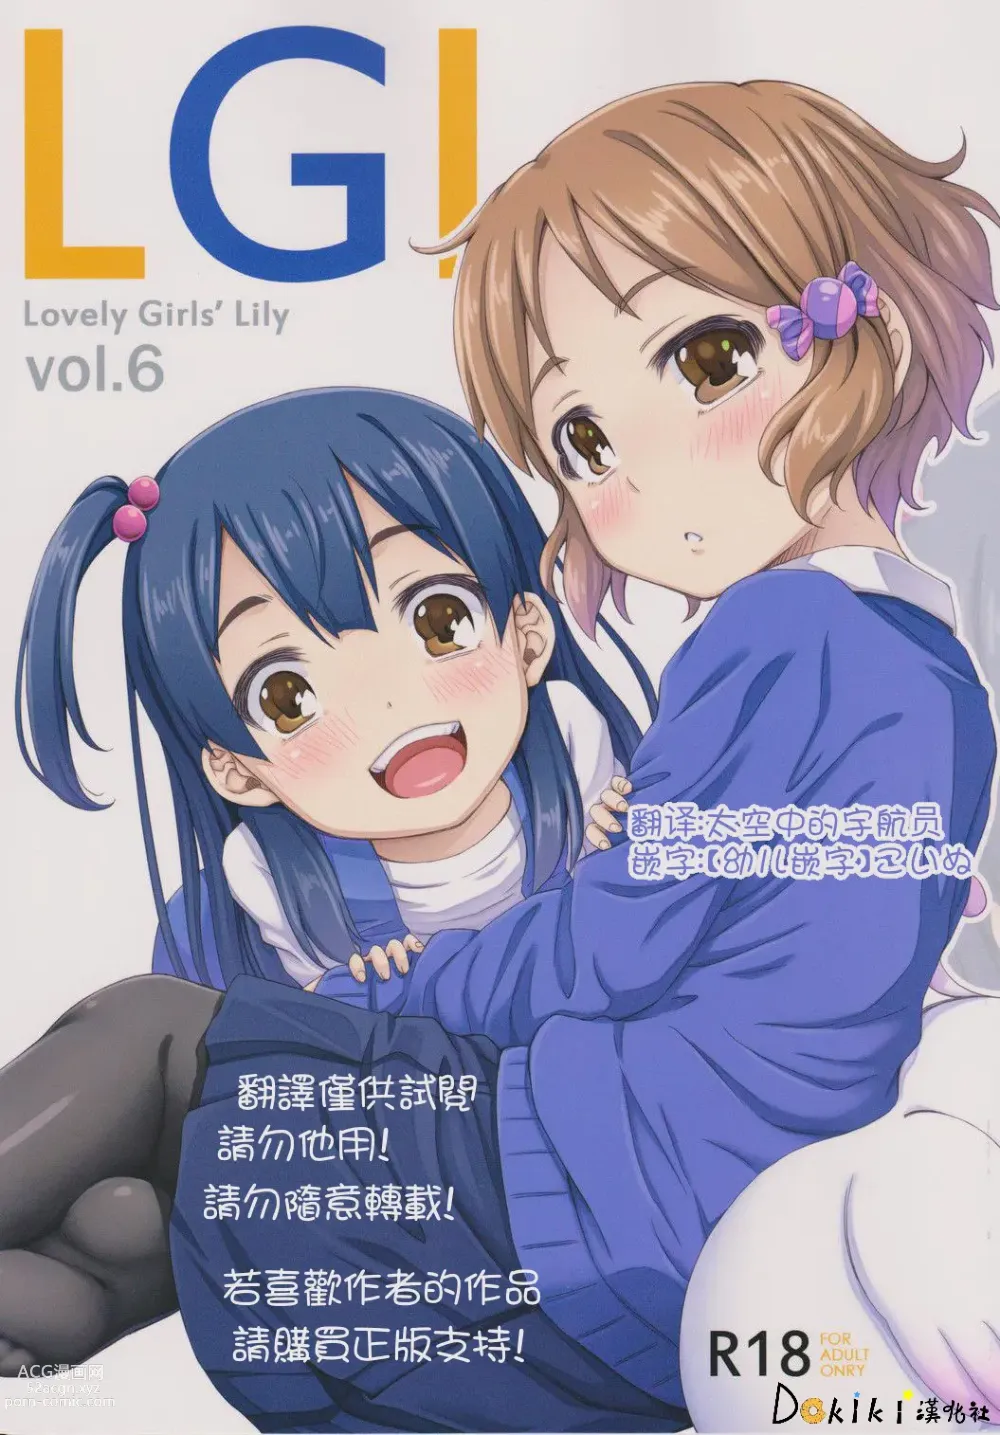 Page 1 of doujinshi Lovely Girls Lily vol. 6